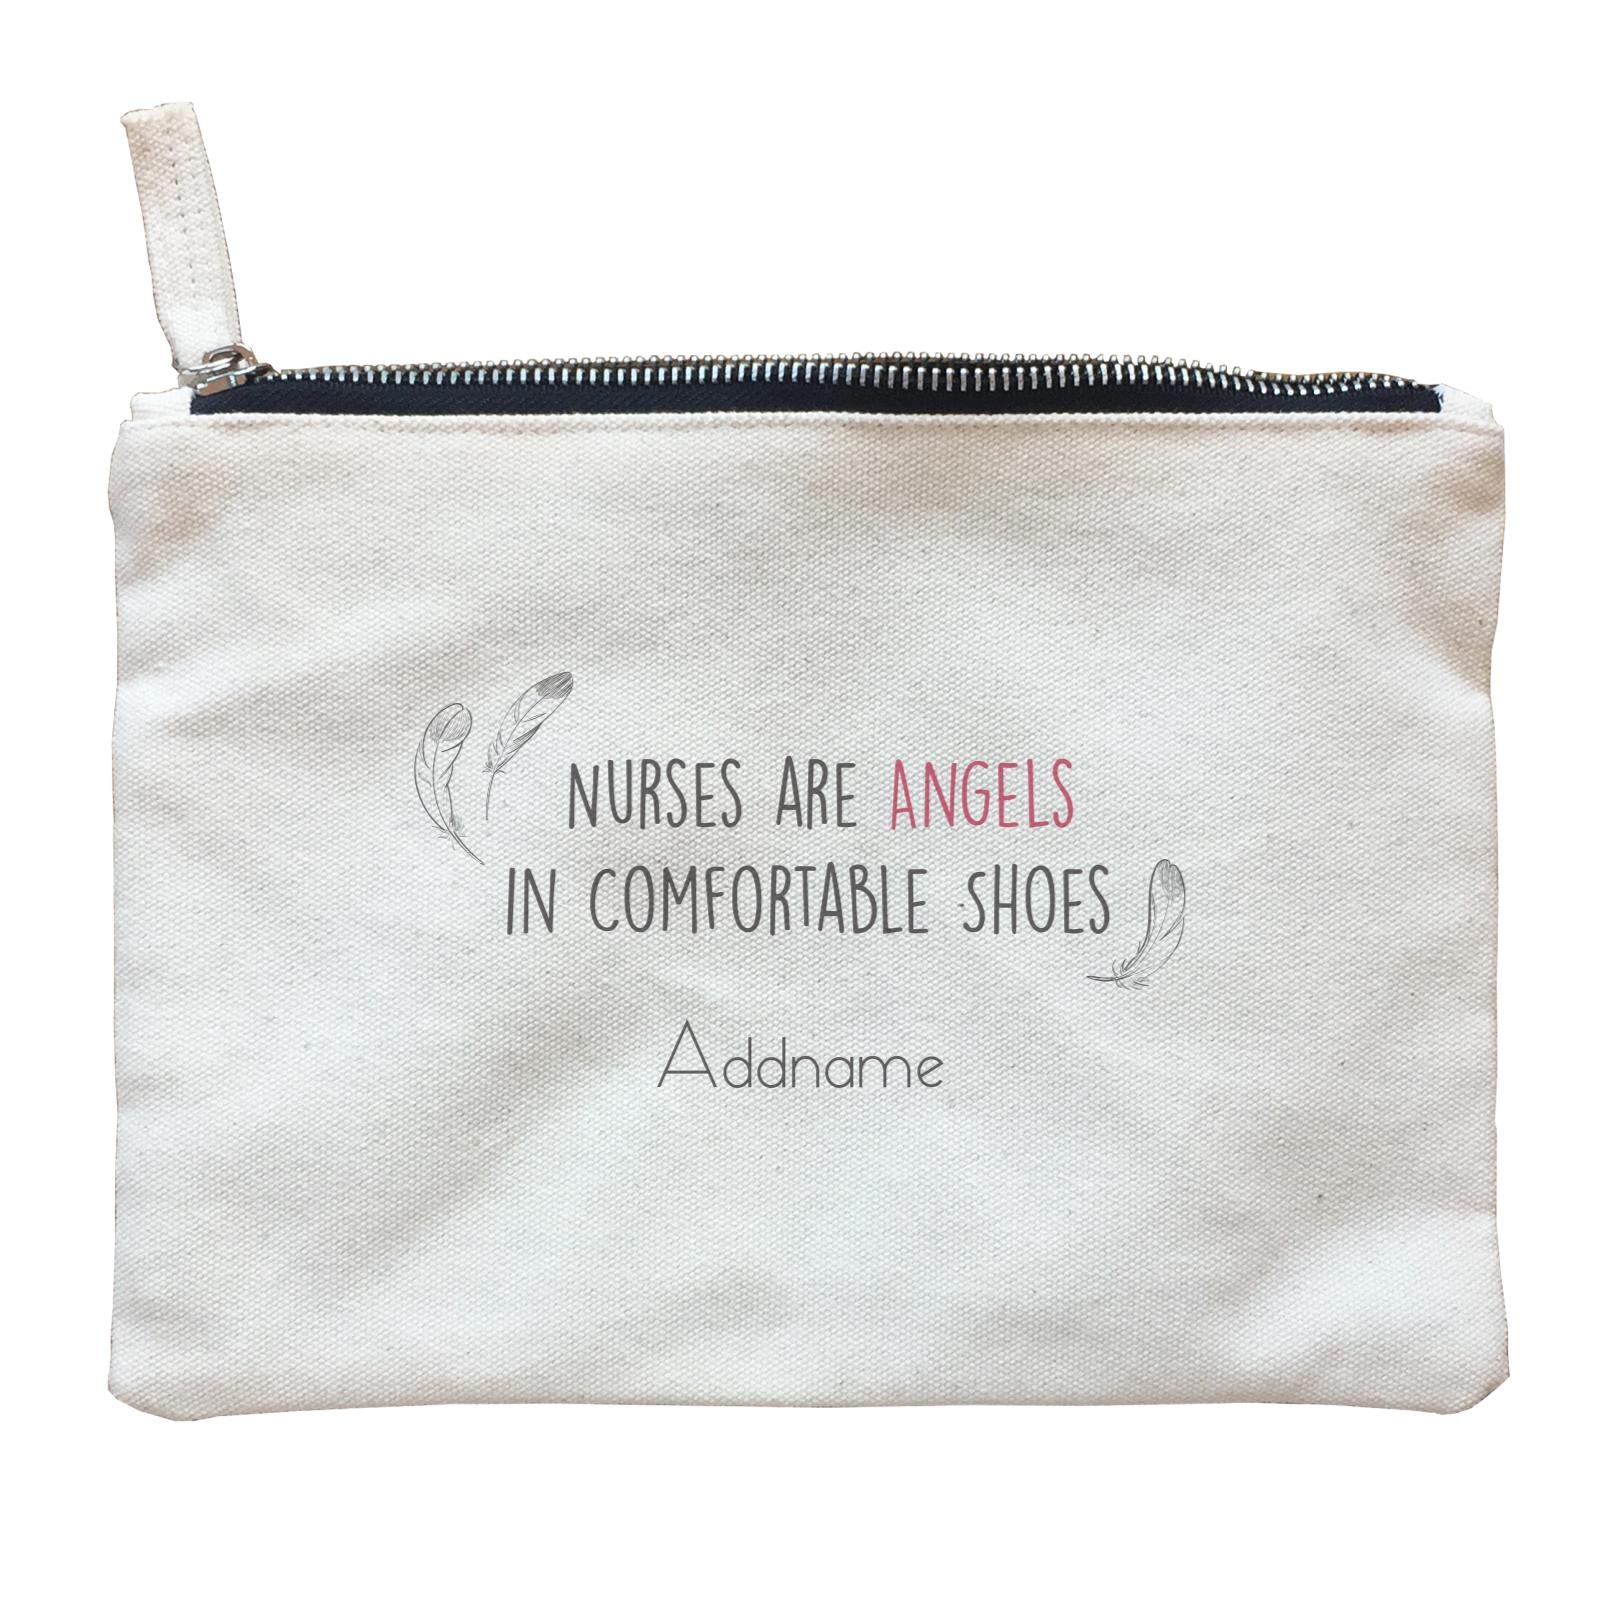 Nurses Are Angels In Comfortable Shoes Zipper Pouch